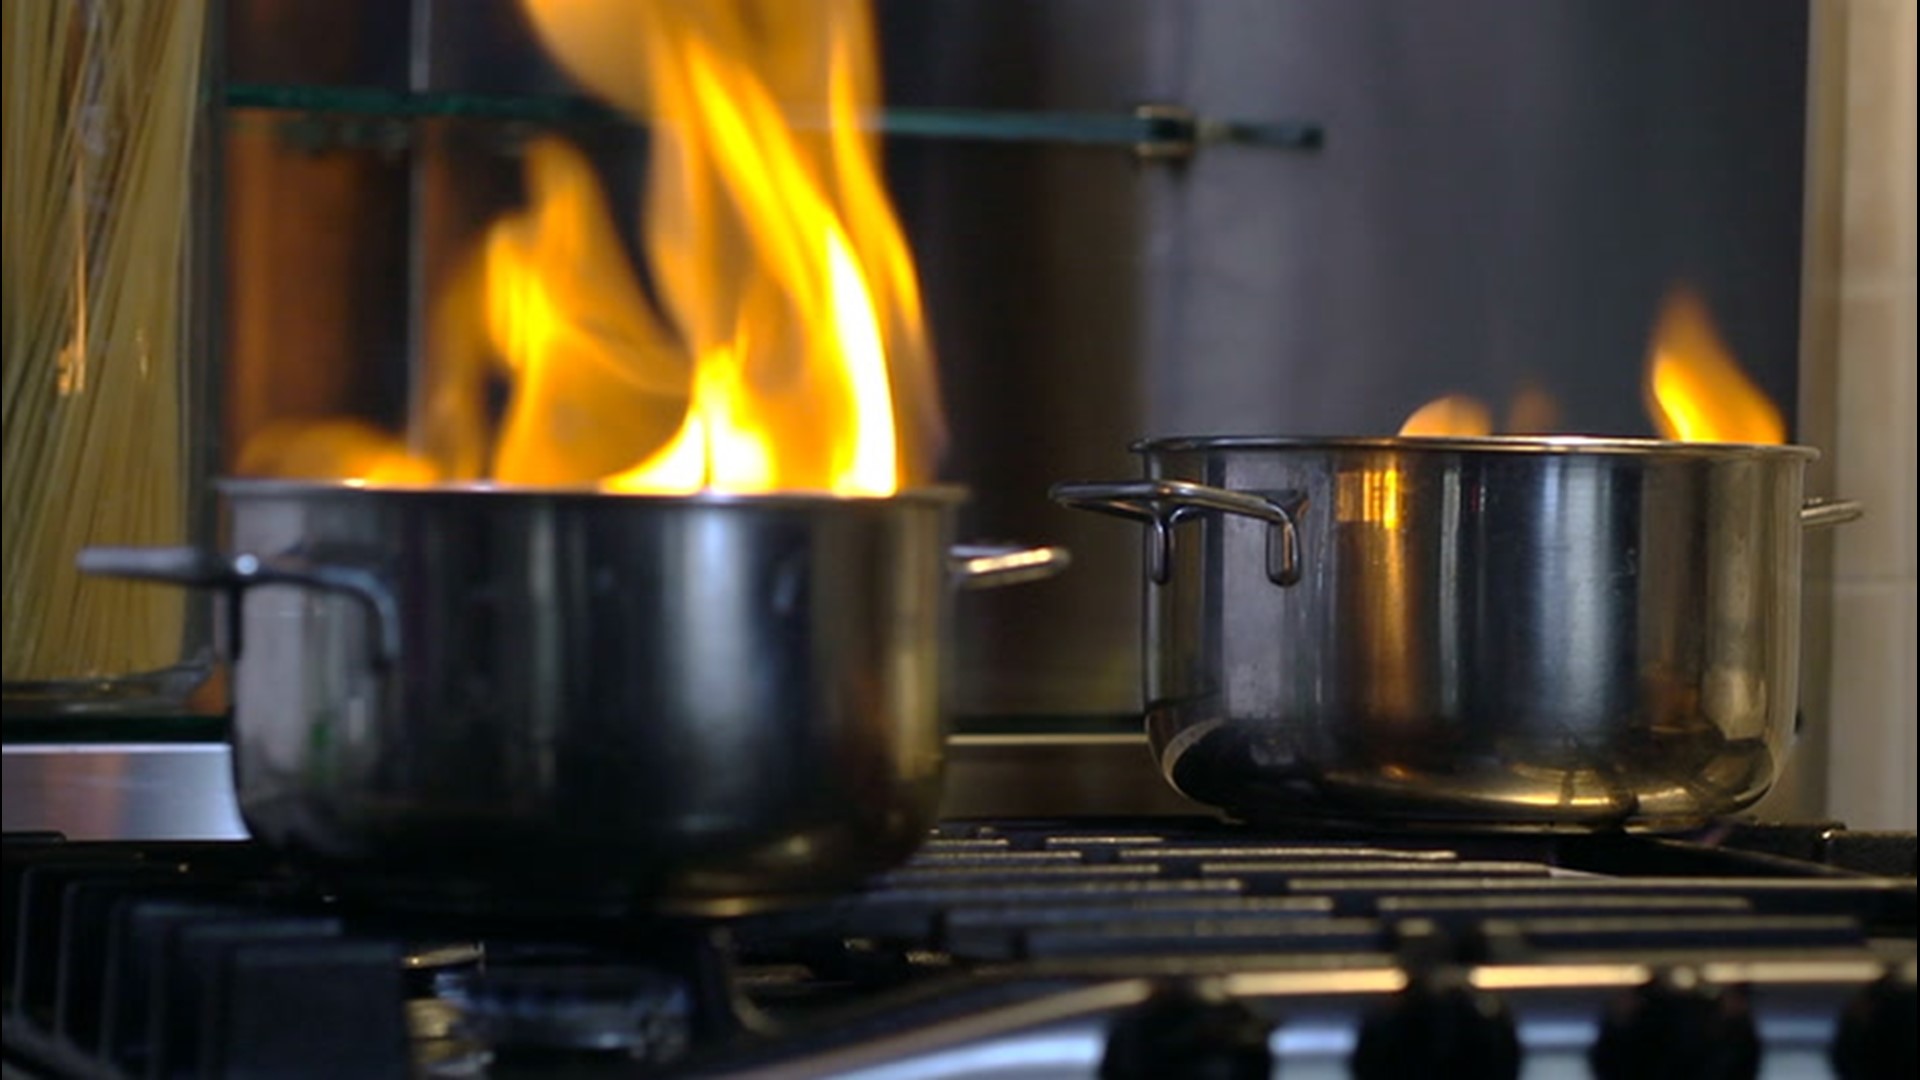 Home-cooking fires are at their peak during Thanksgiving due to many people preparing meals for their families. Here's how you can safely prepare your food for the holiday.